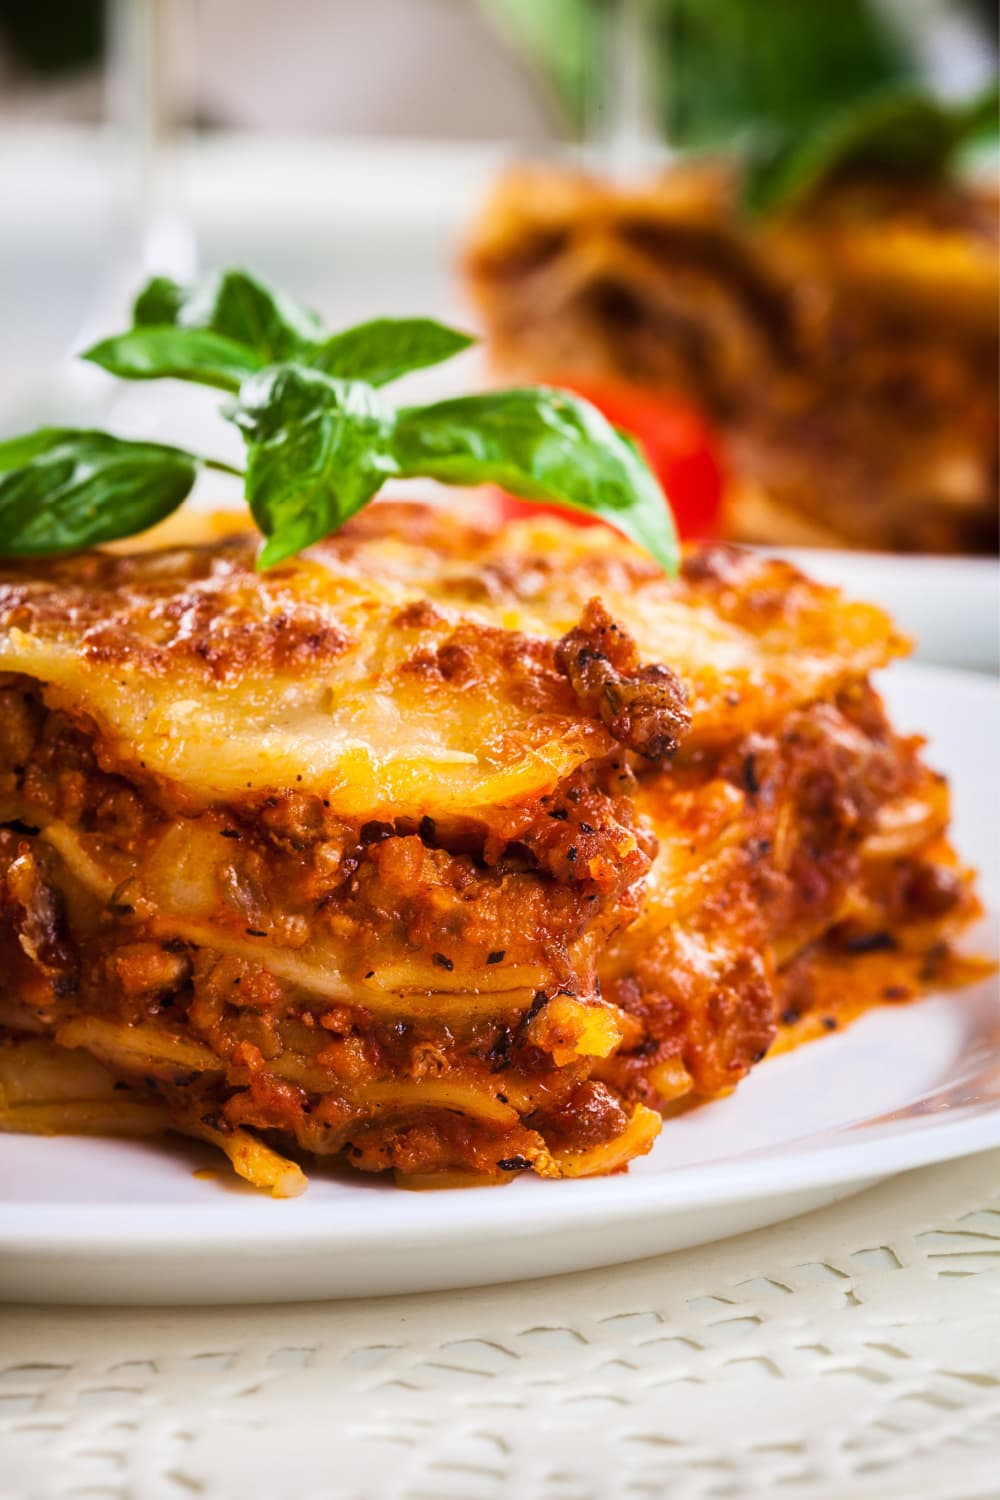 Slice of layers of lasagna, spaghetti sauce, cottage cheese and mozzarella cheese served on a plate with basil leaf on top